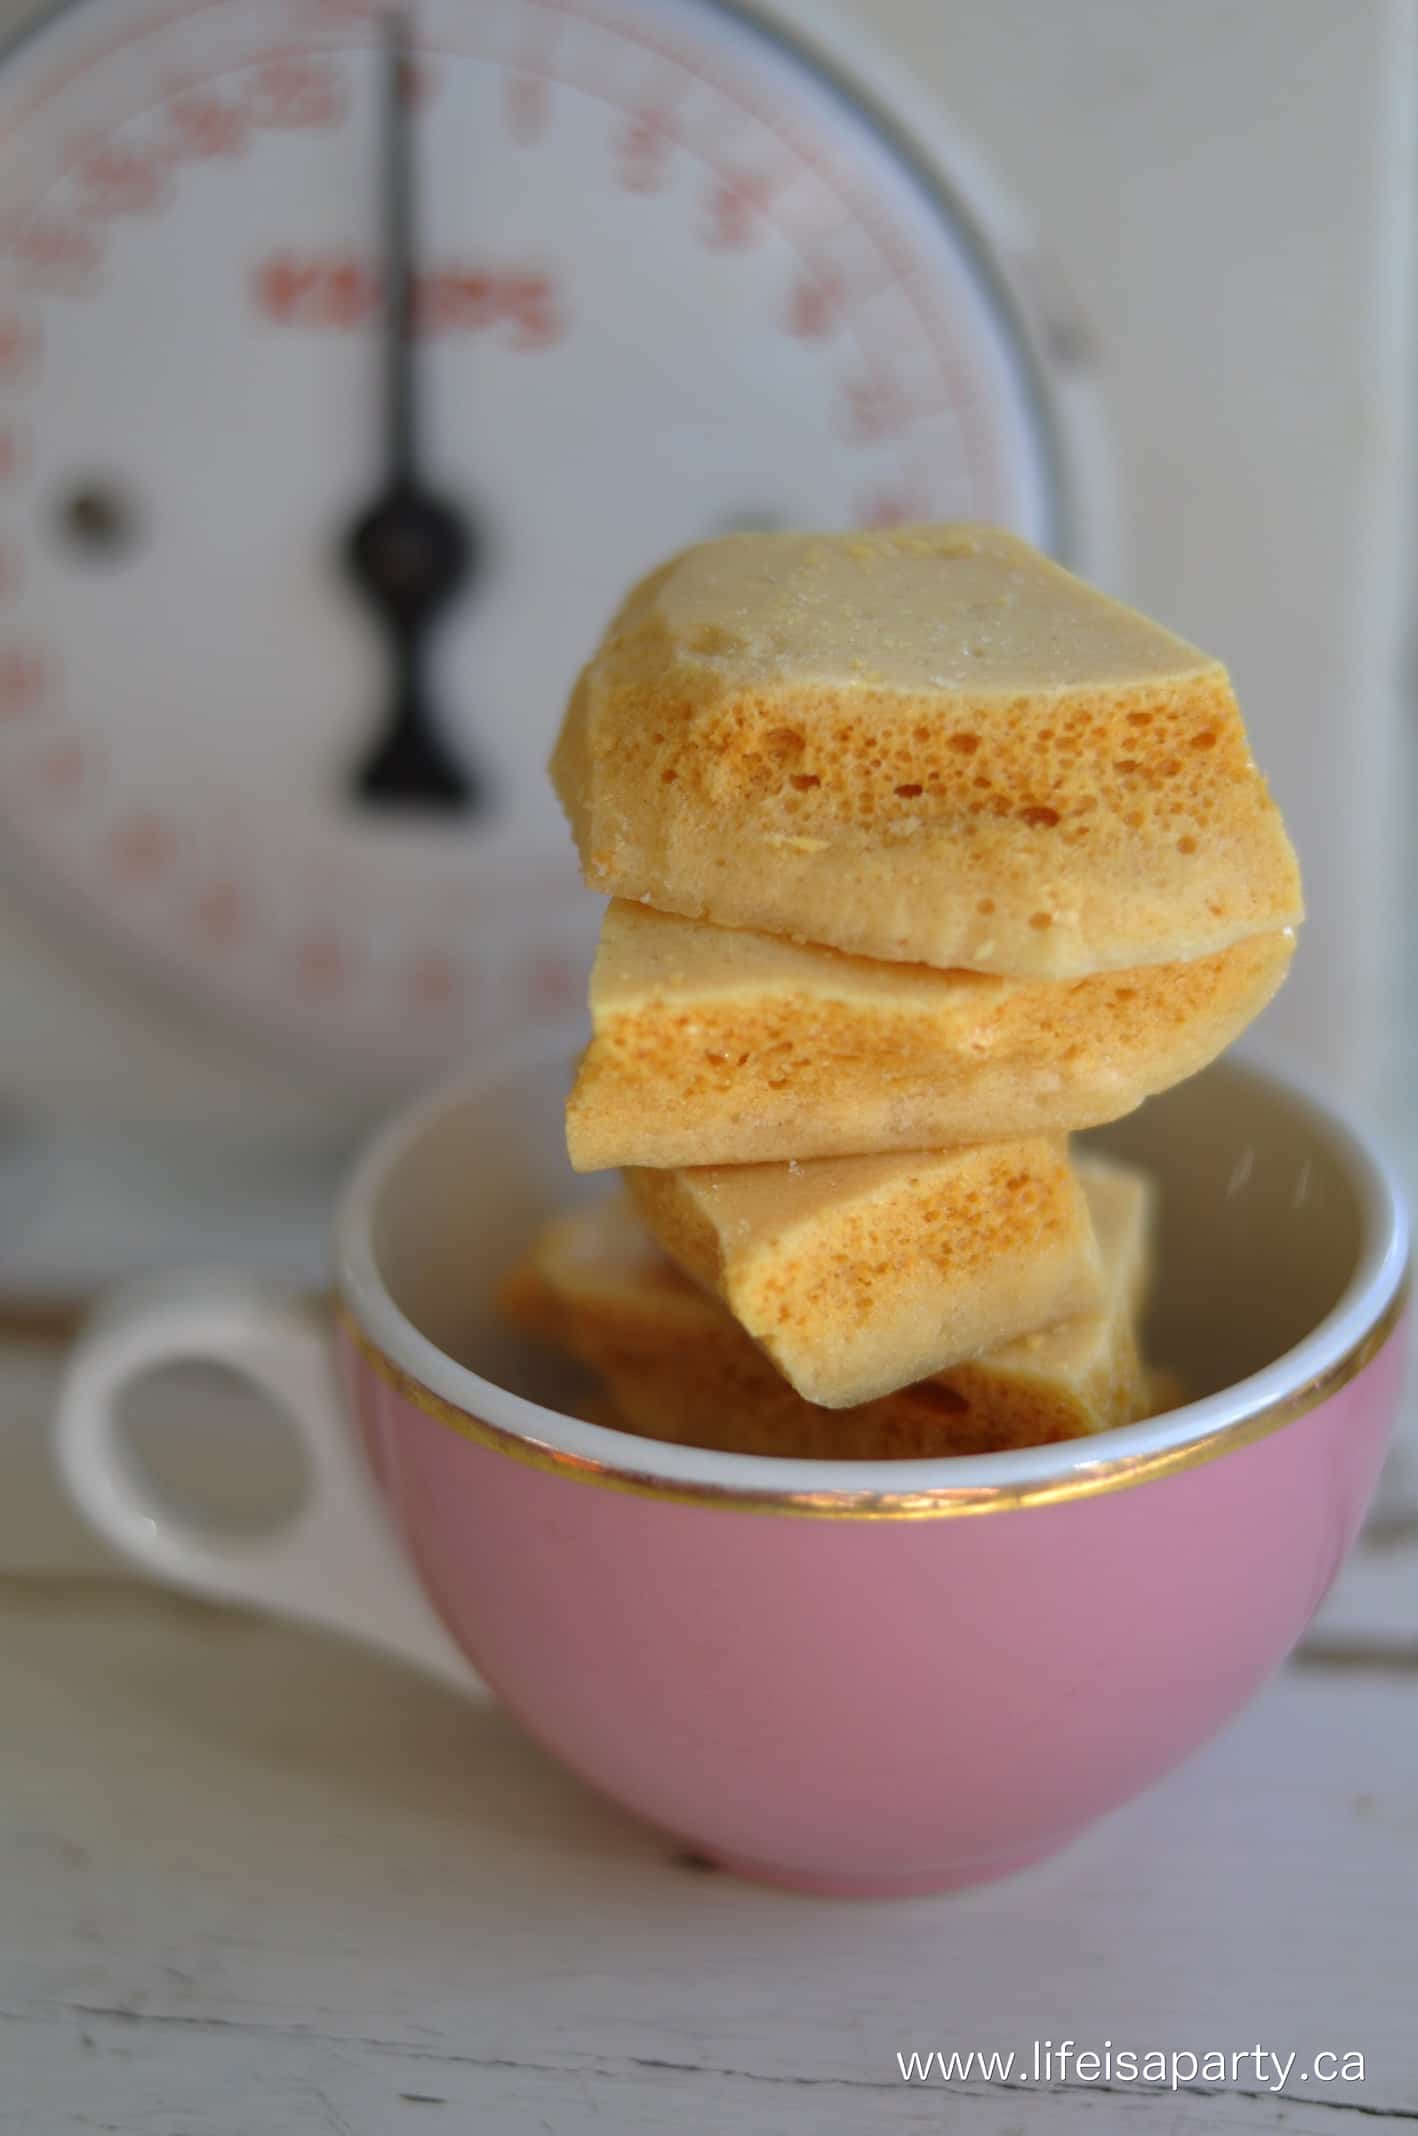 sponge candy stacked up in a pink tea cup